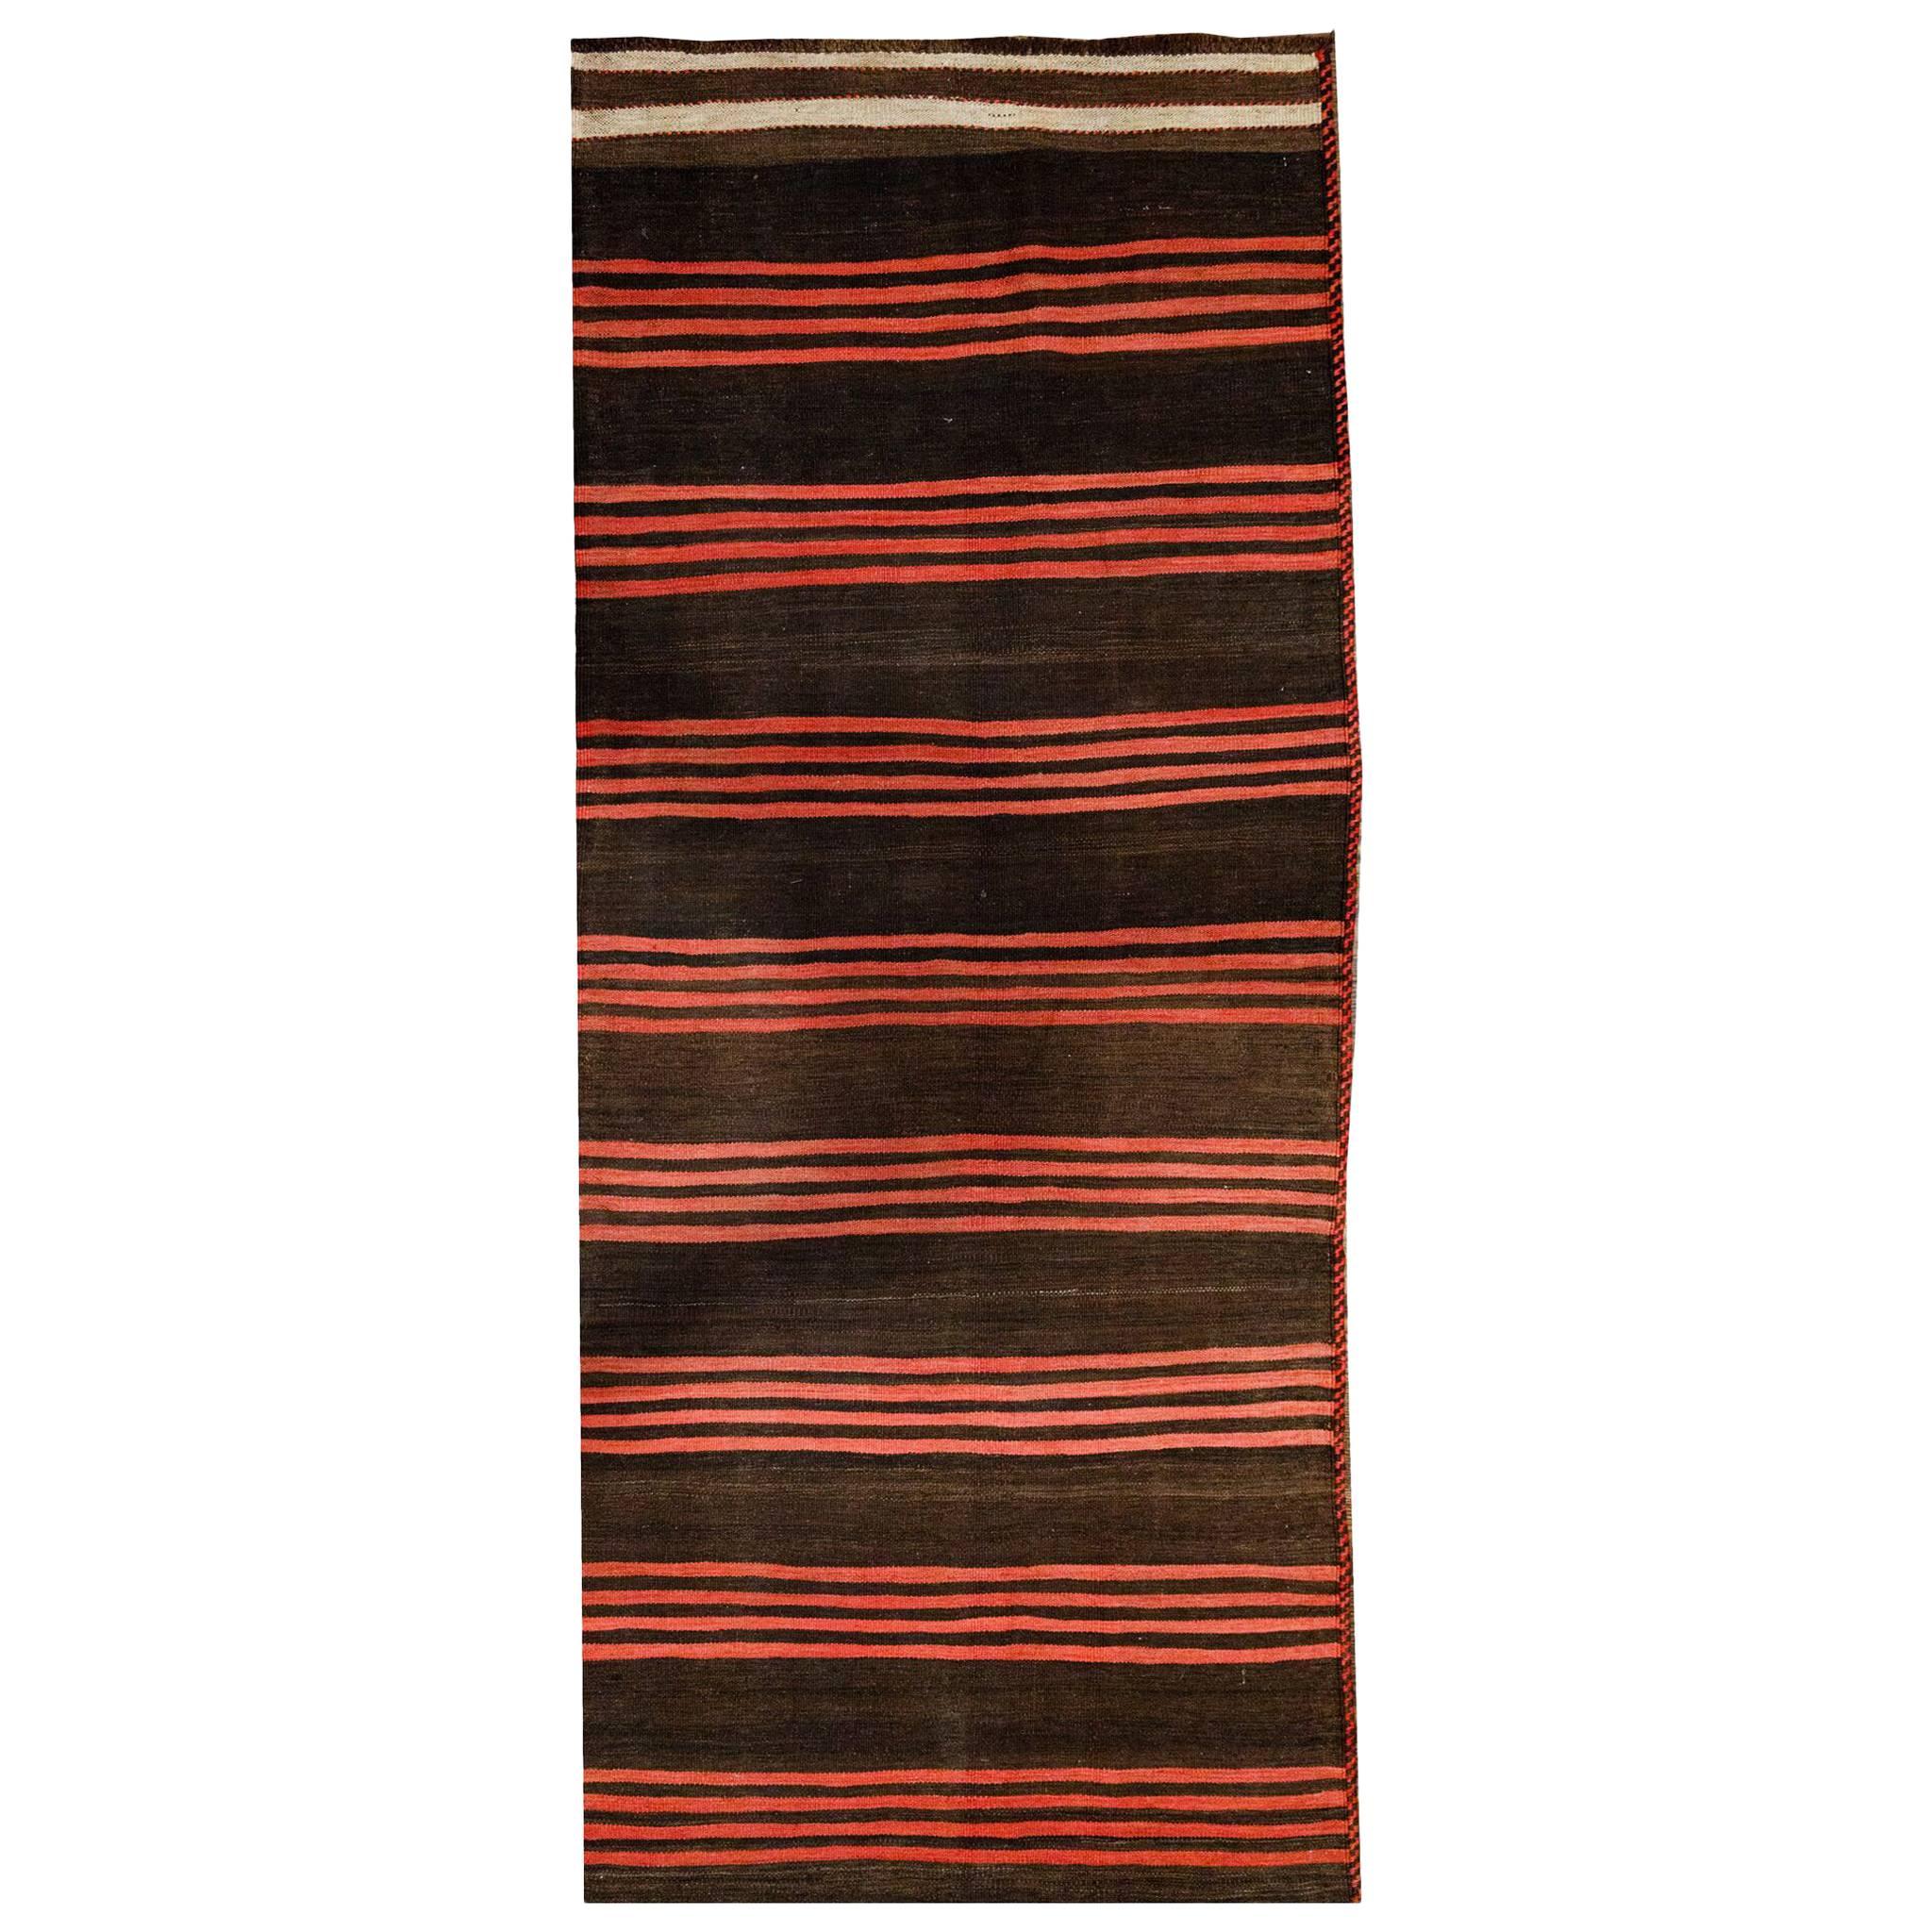 20th Century Turkish Red and Brown Flat-Weave Runner